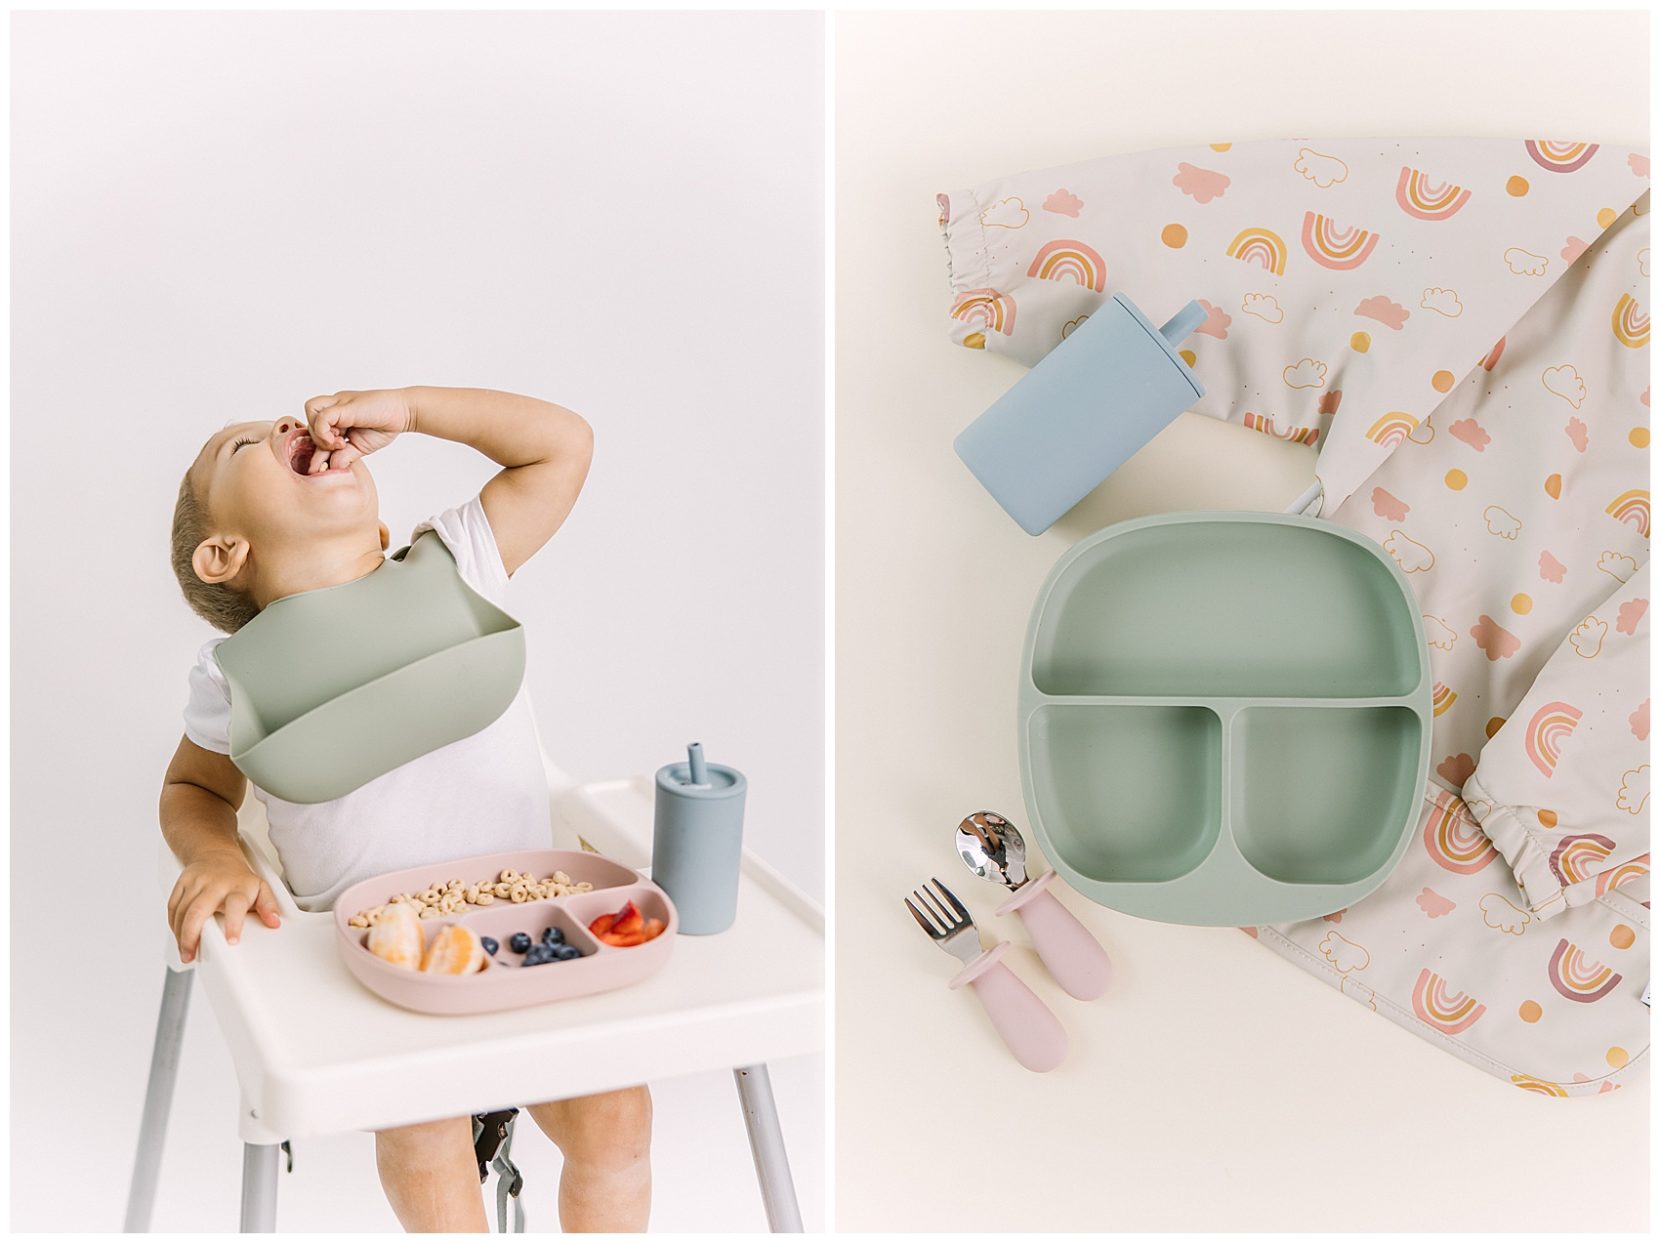 commercial baby product photography libbo love jenine tewell 0021